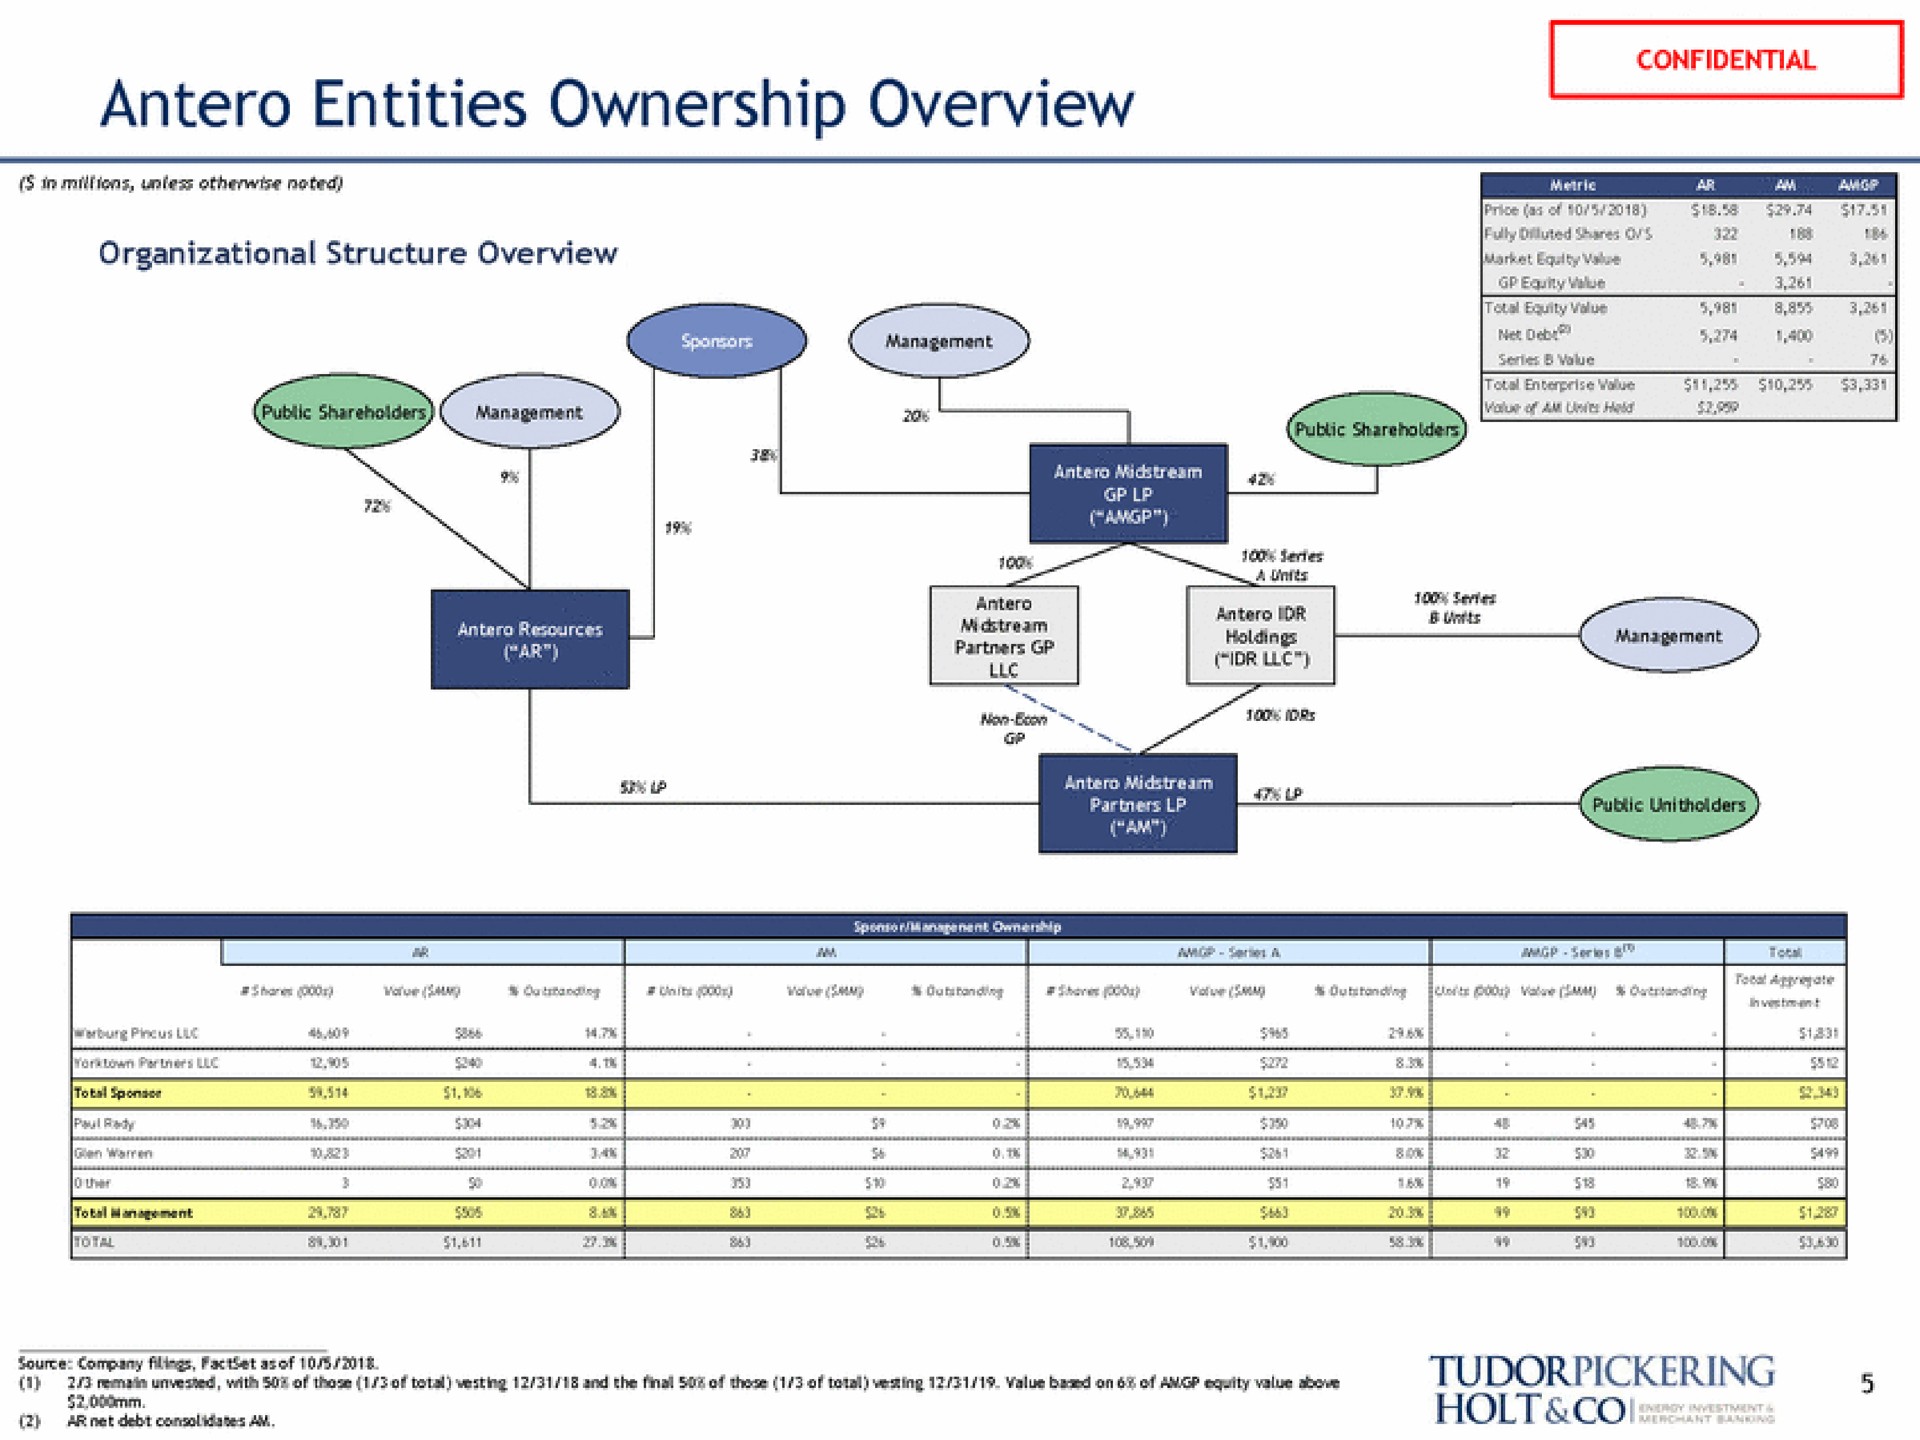 entities ownership overview | Tudor, Pickering, Holt & Co